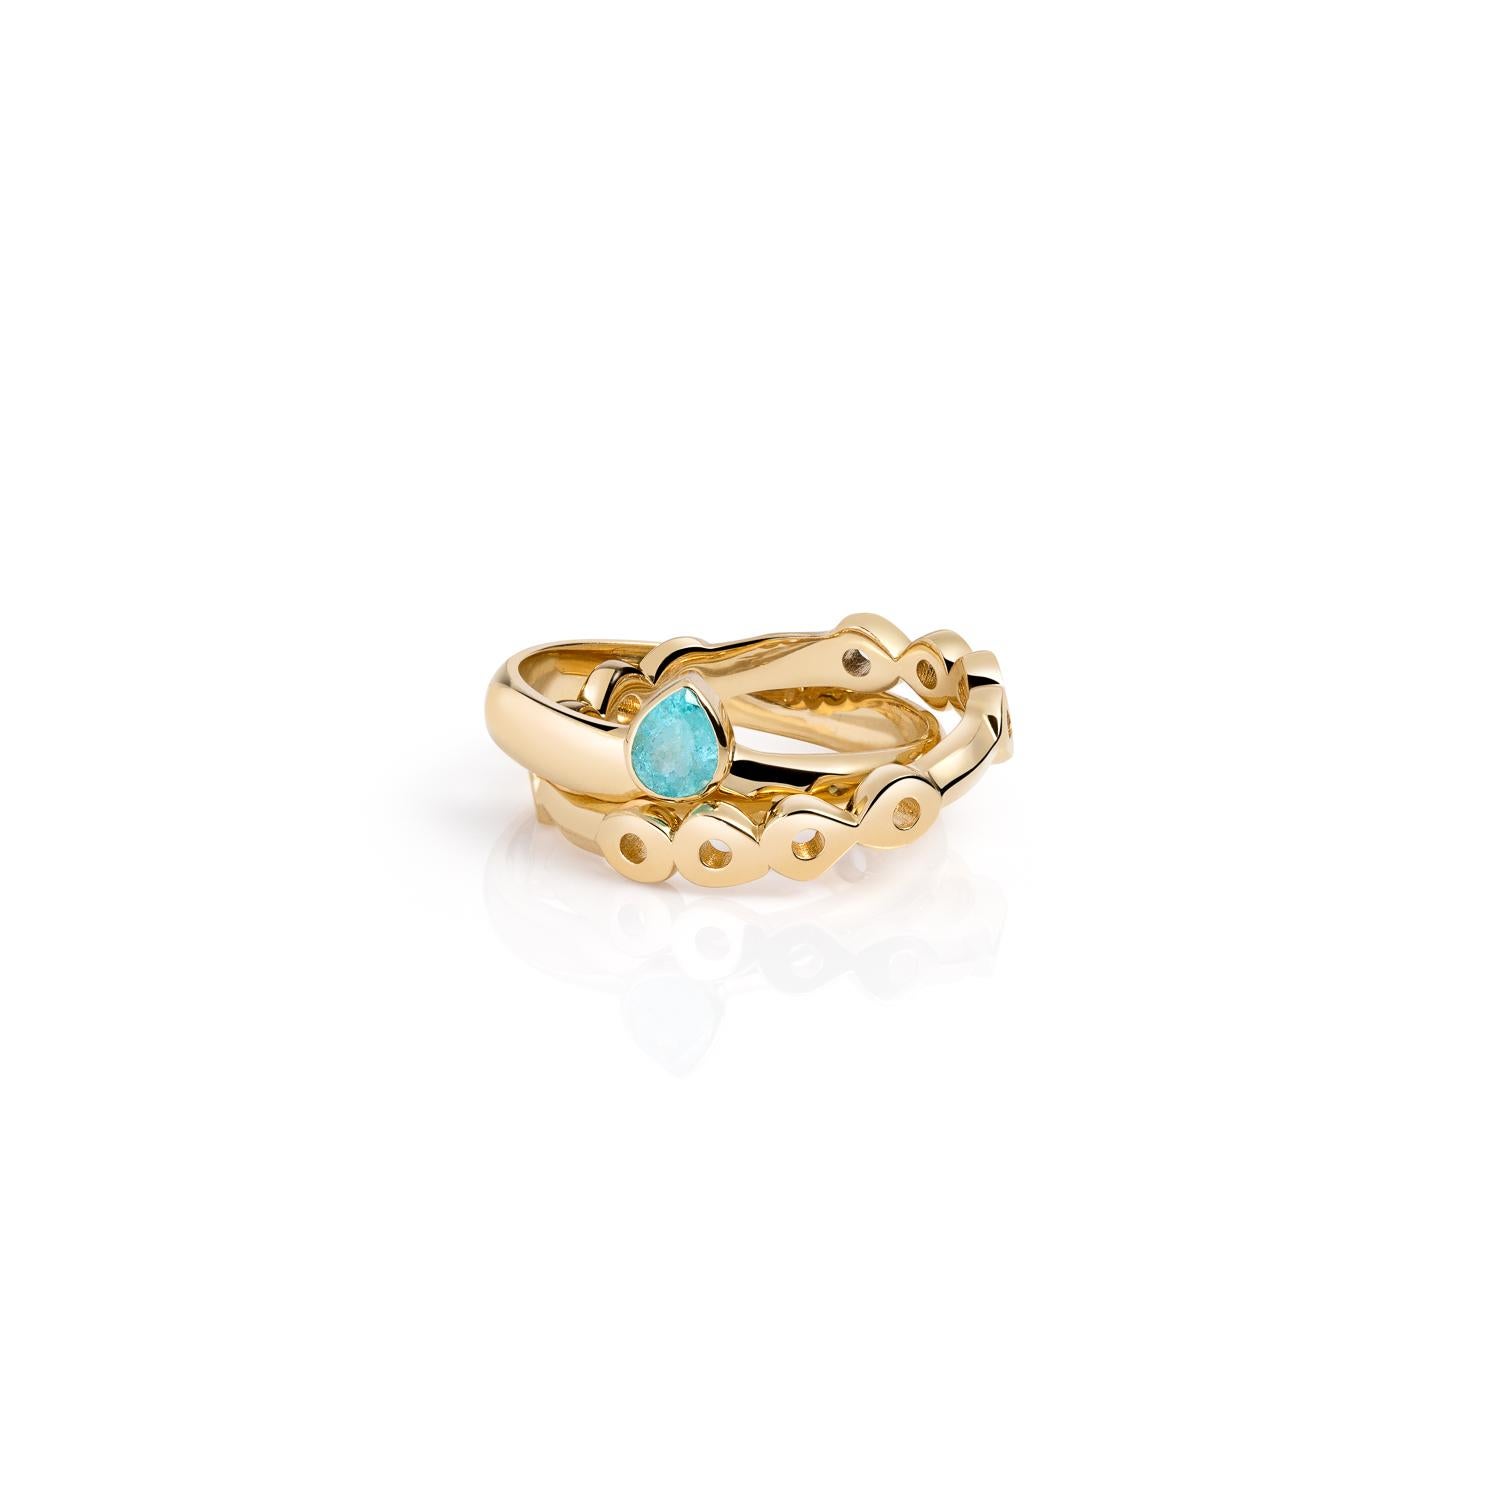 We linked a ring band with a stunning Paraiba Tourmaline Pear shape stone to a plain half-round band for added comfort.

These two rolling ring bands are comfortable, make a statement and work great as alternative wedding bands. Hi June Parker